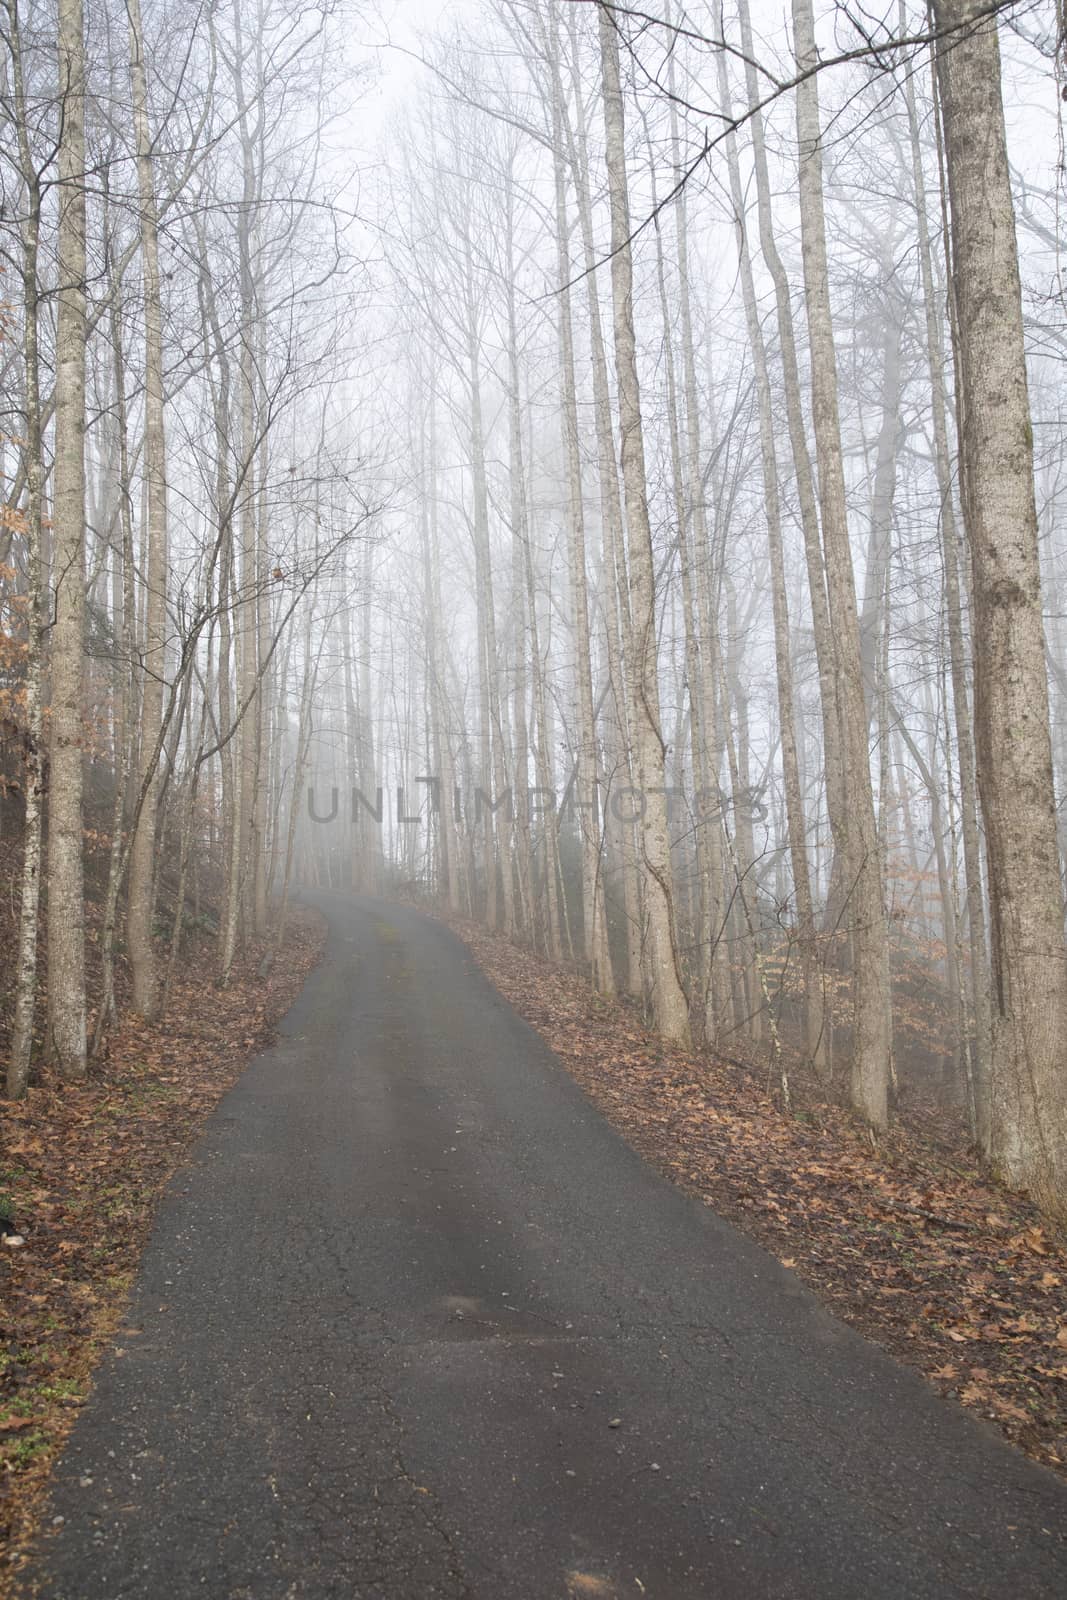 Looking Up a Rural Drive on a Foggy Morning by CharlieFloyd